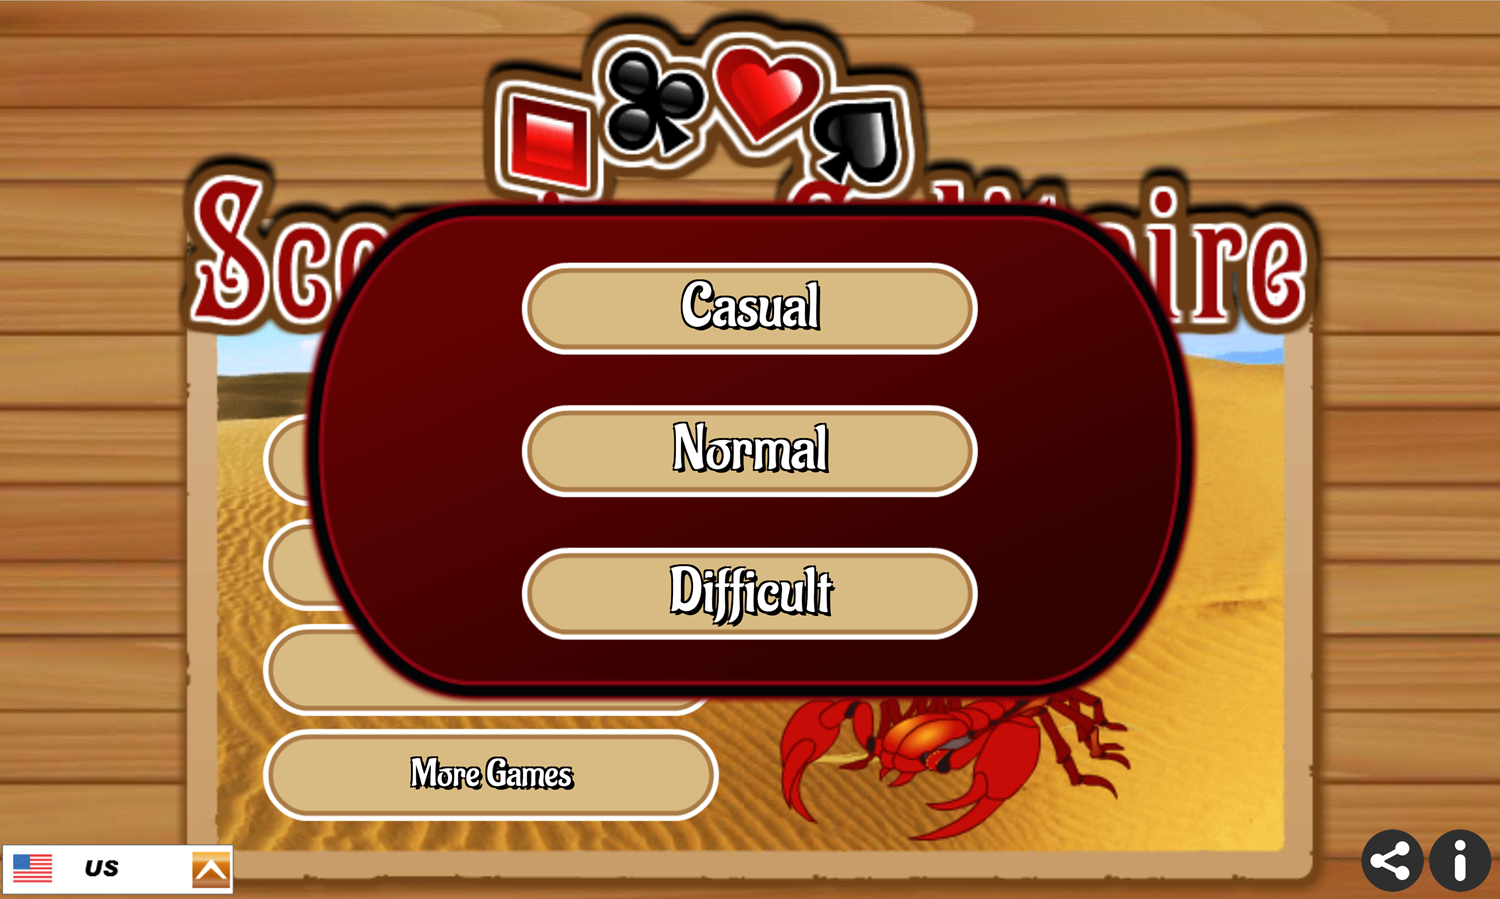 Scorpion Solitaire Game Difficulty Select Screen Screenshot.